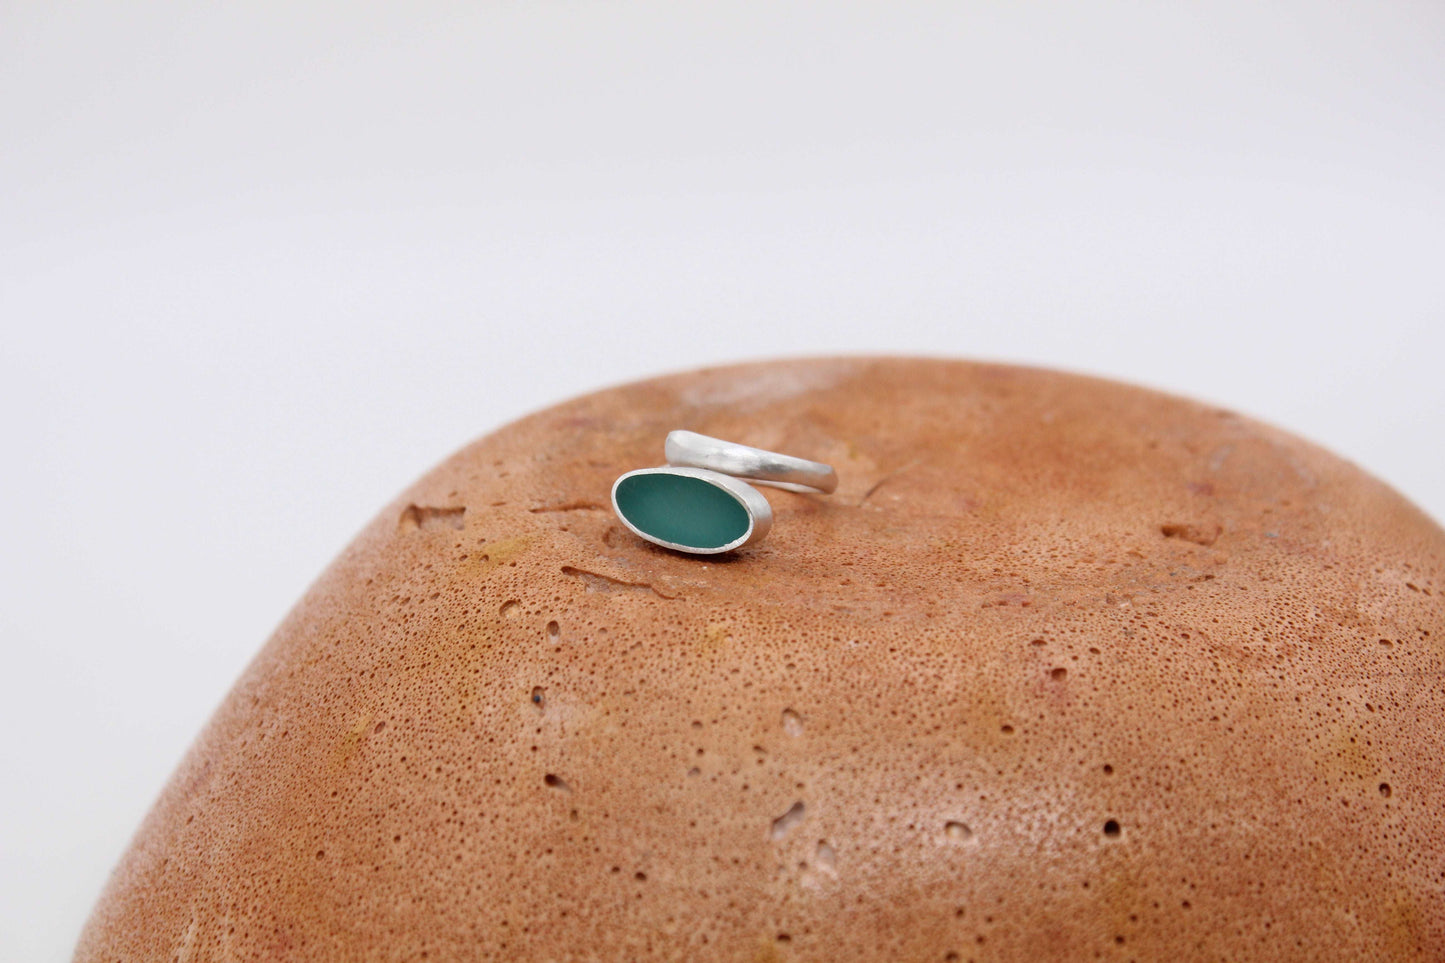 Teal oval shape ring